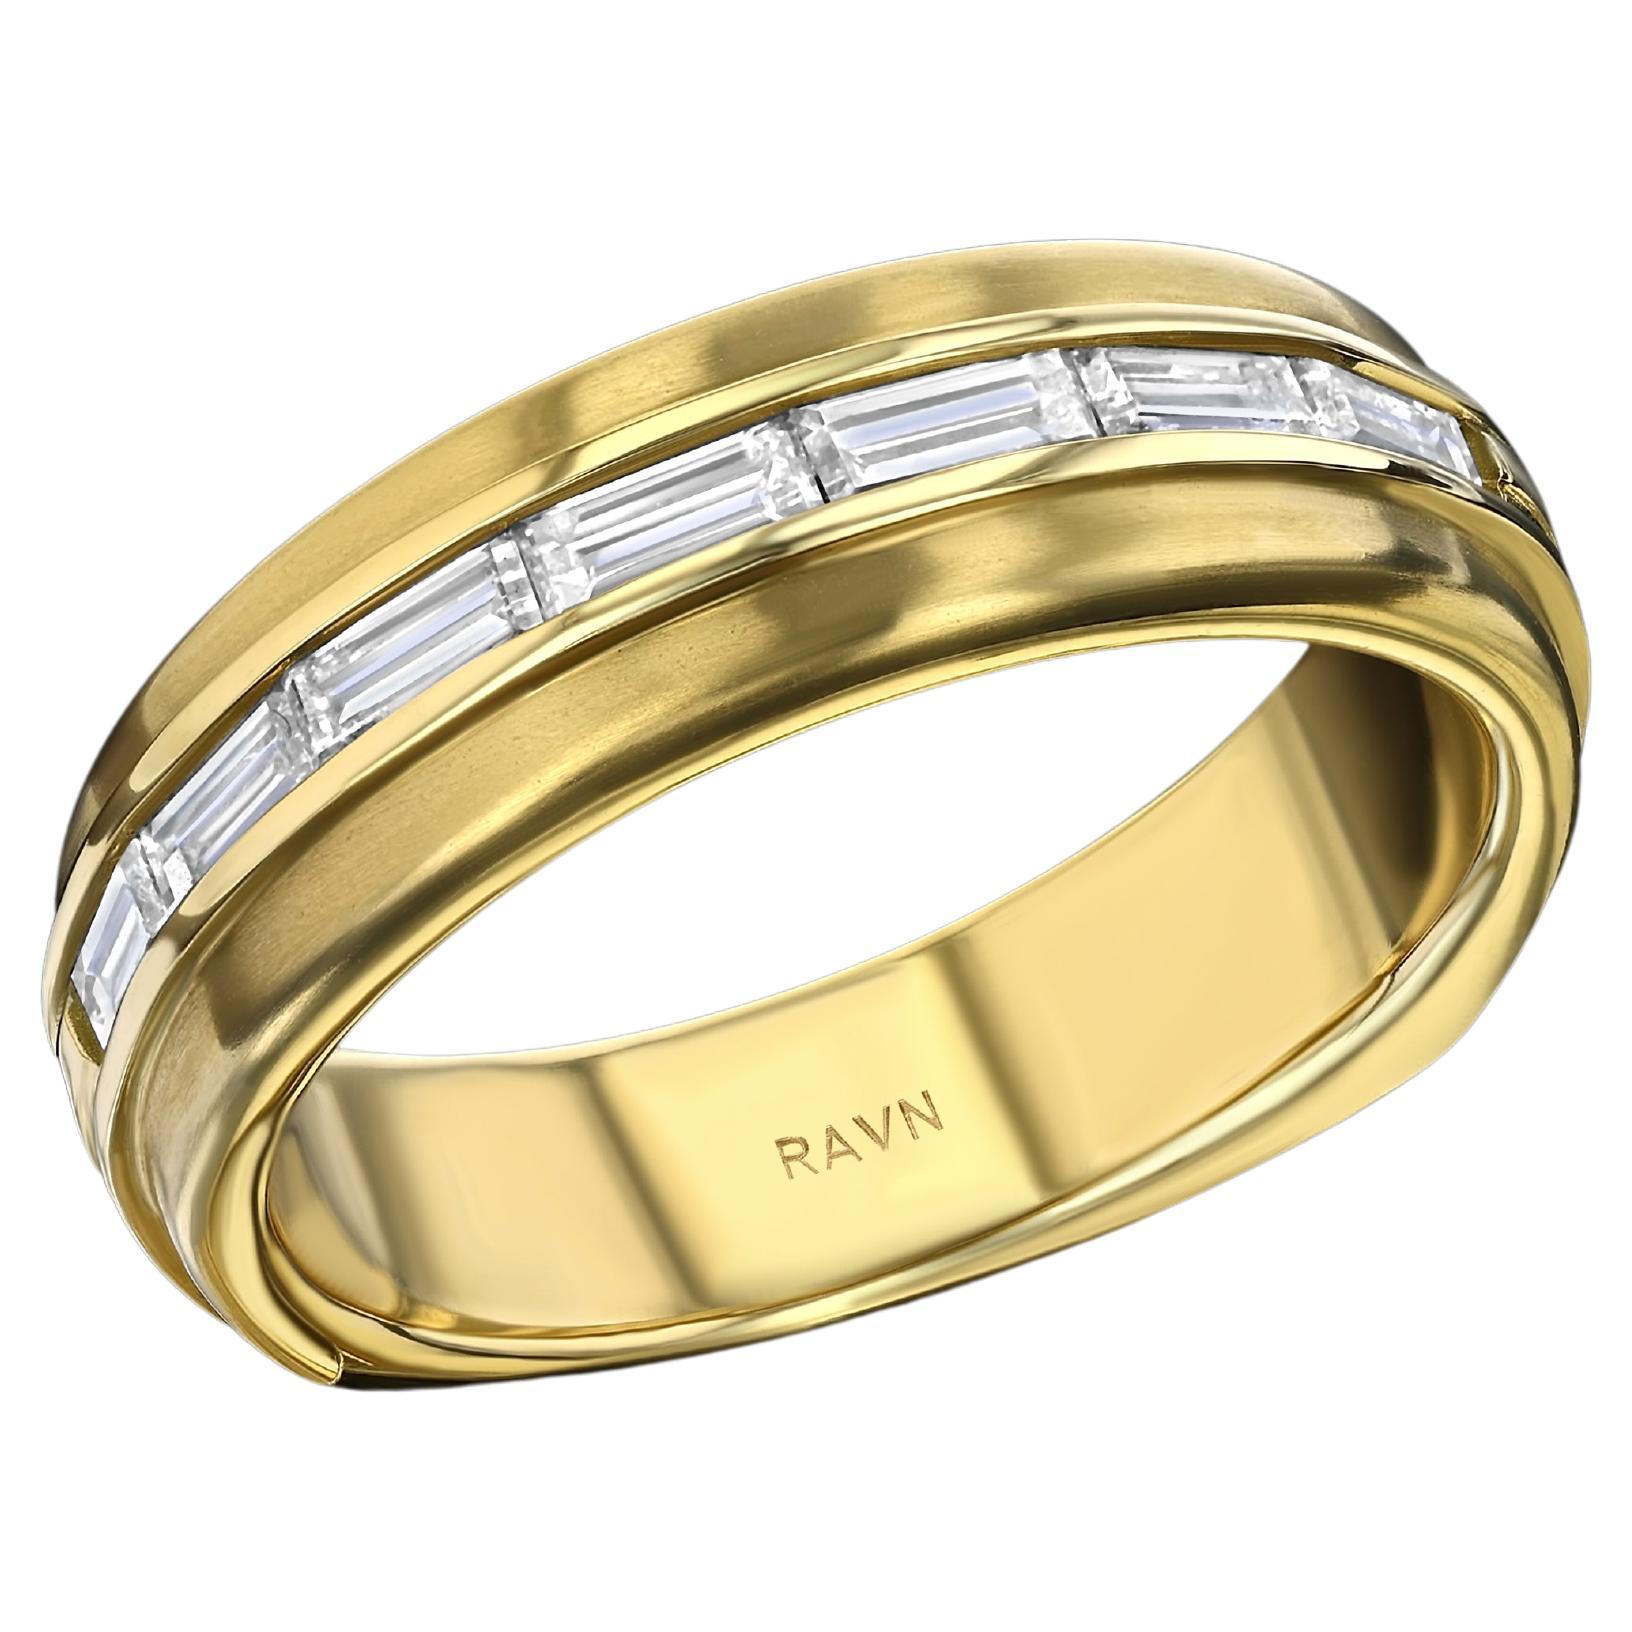 For Sale:  House of RAVN, 18k Yellow Gold, Men's Euro Band, with 7 Baguette Diamonds